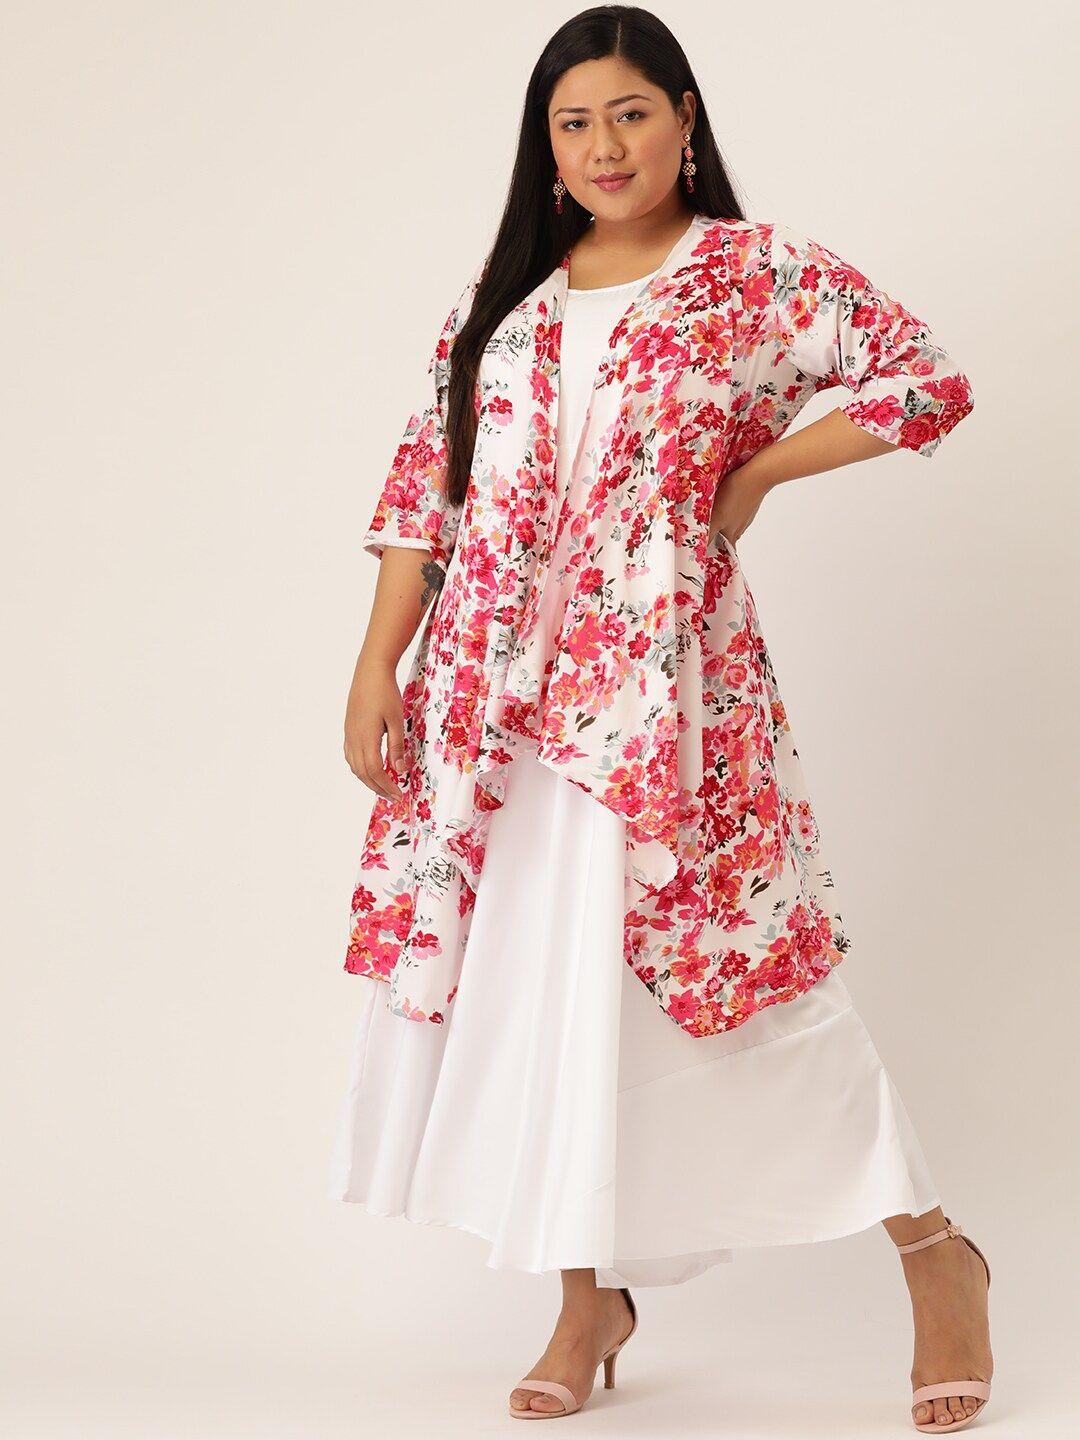 therebelinme-women-plus-size-white-solid-color-maxi-dress-with-floral-printed-shrug